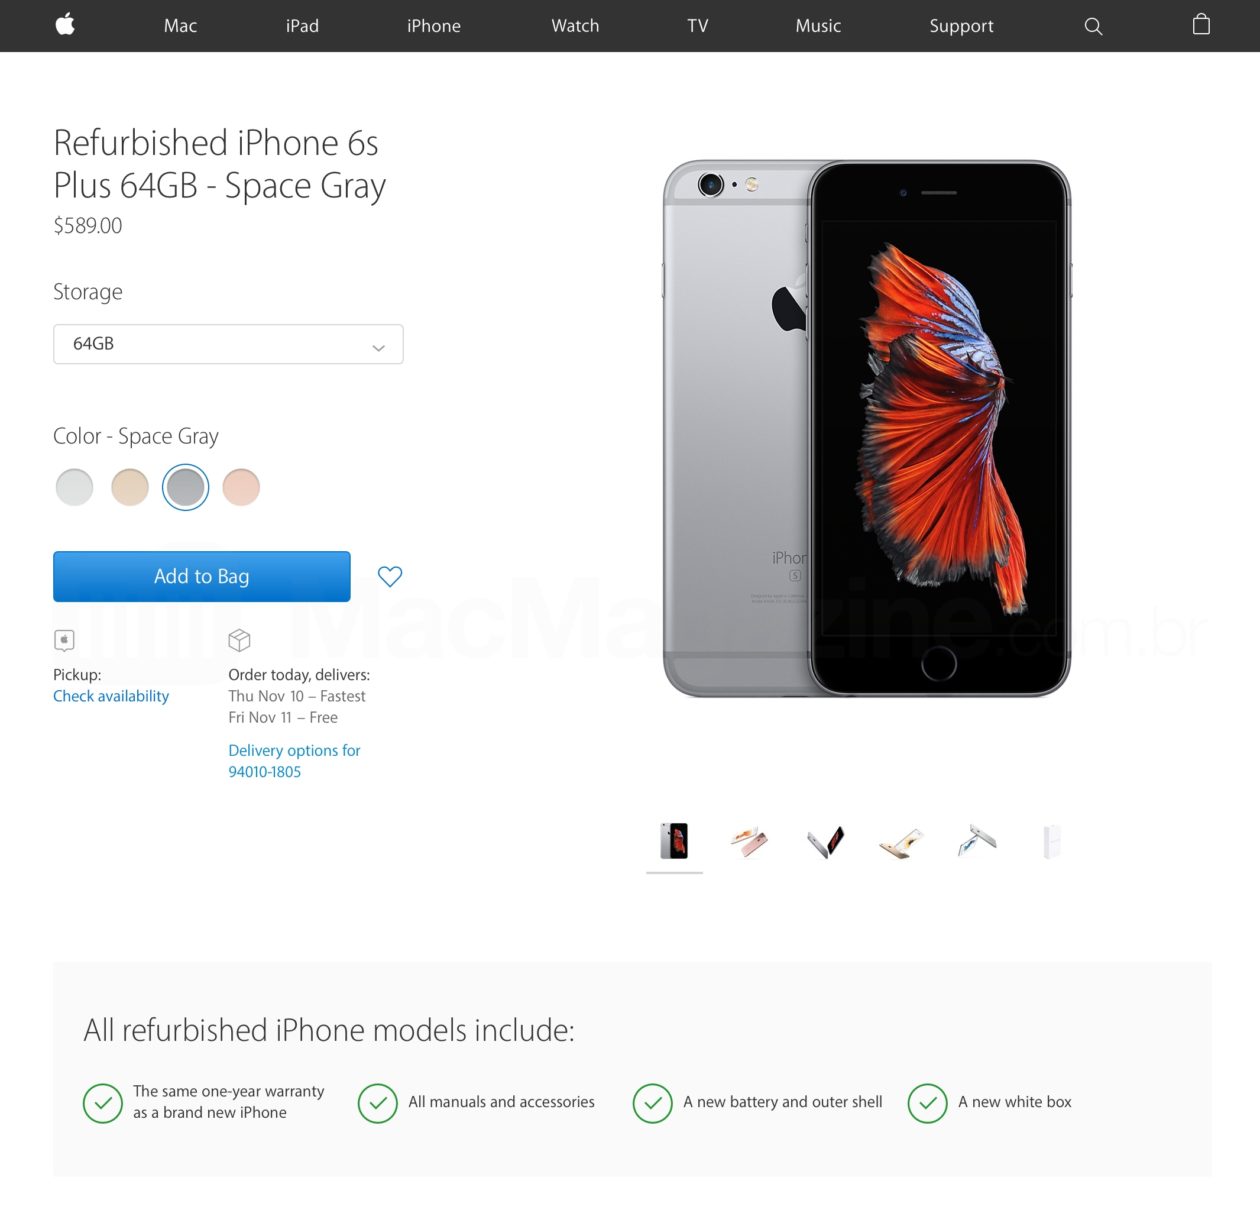 Apple starts selling refurbished iPhones in the United States [atualizado: iPads Pro]